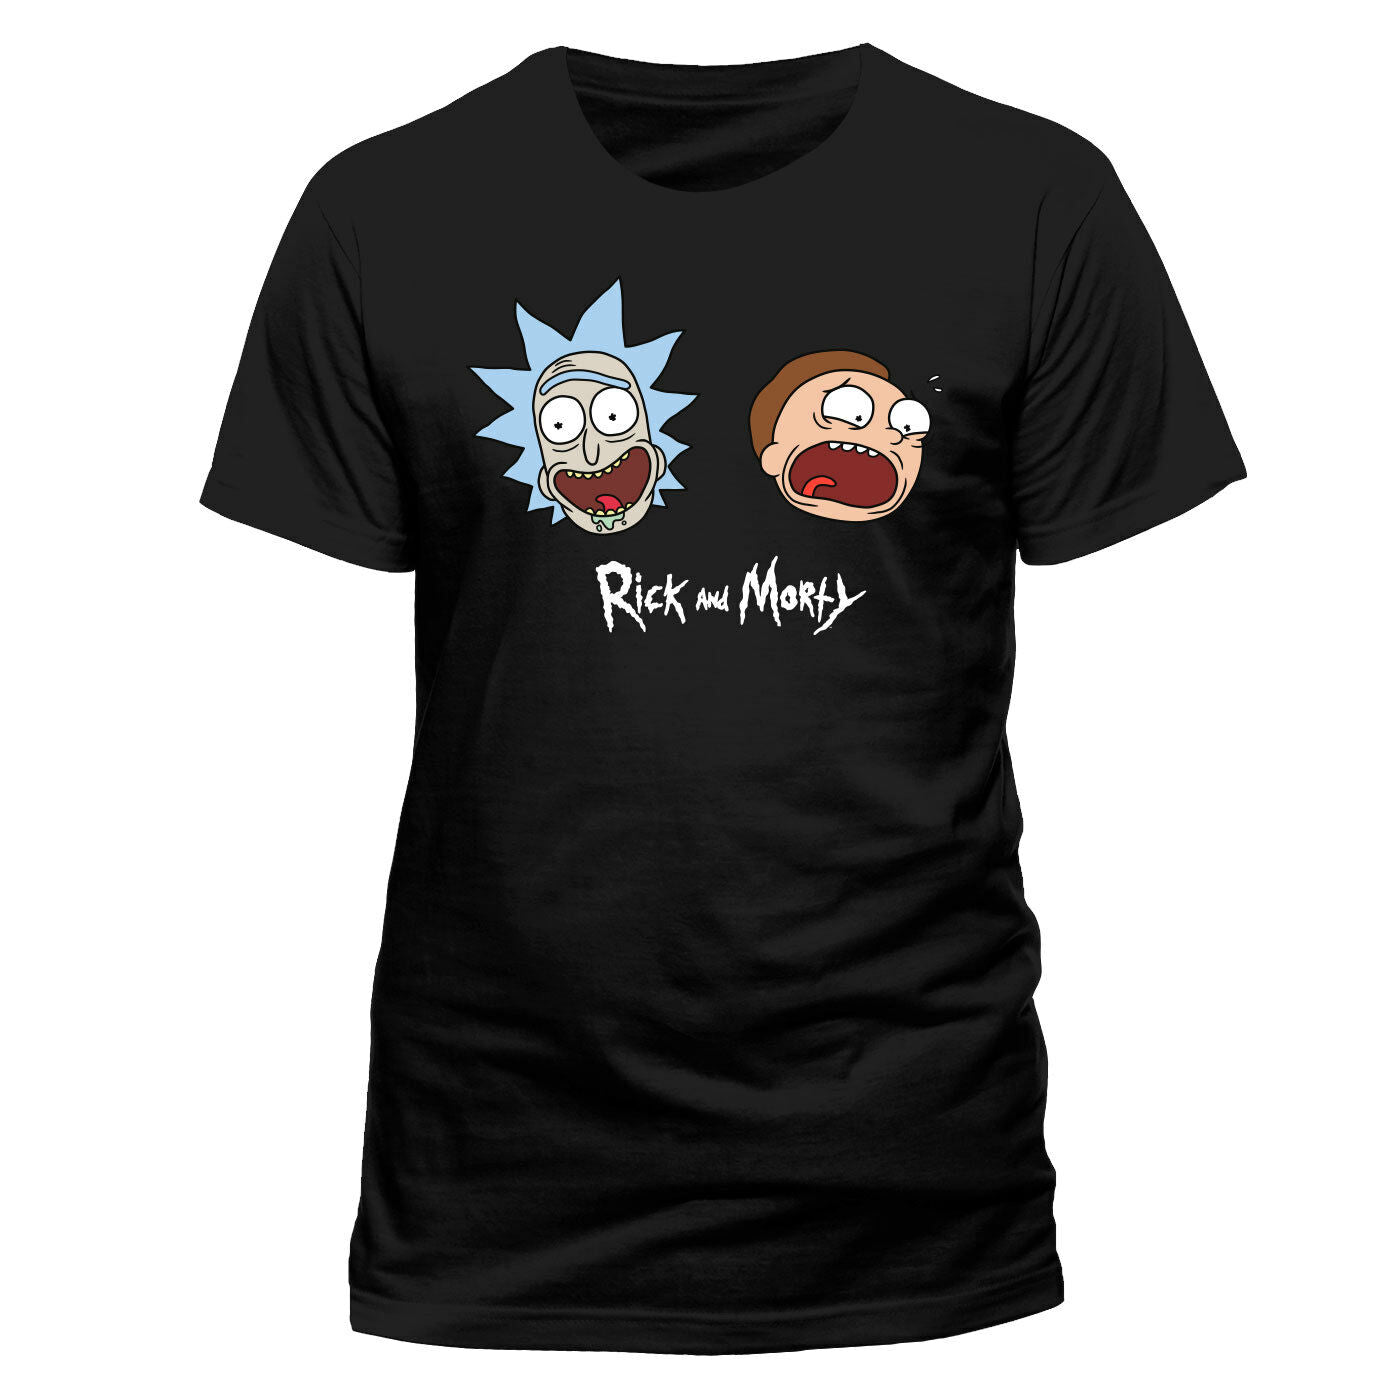 Official Rick and Morty Faces / Heads T-Shirt - Black - X Large